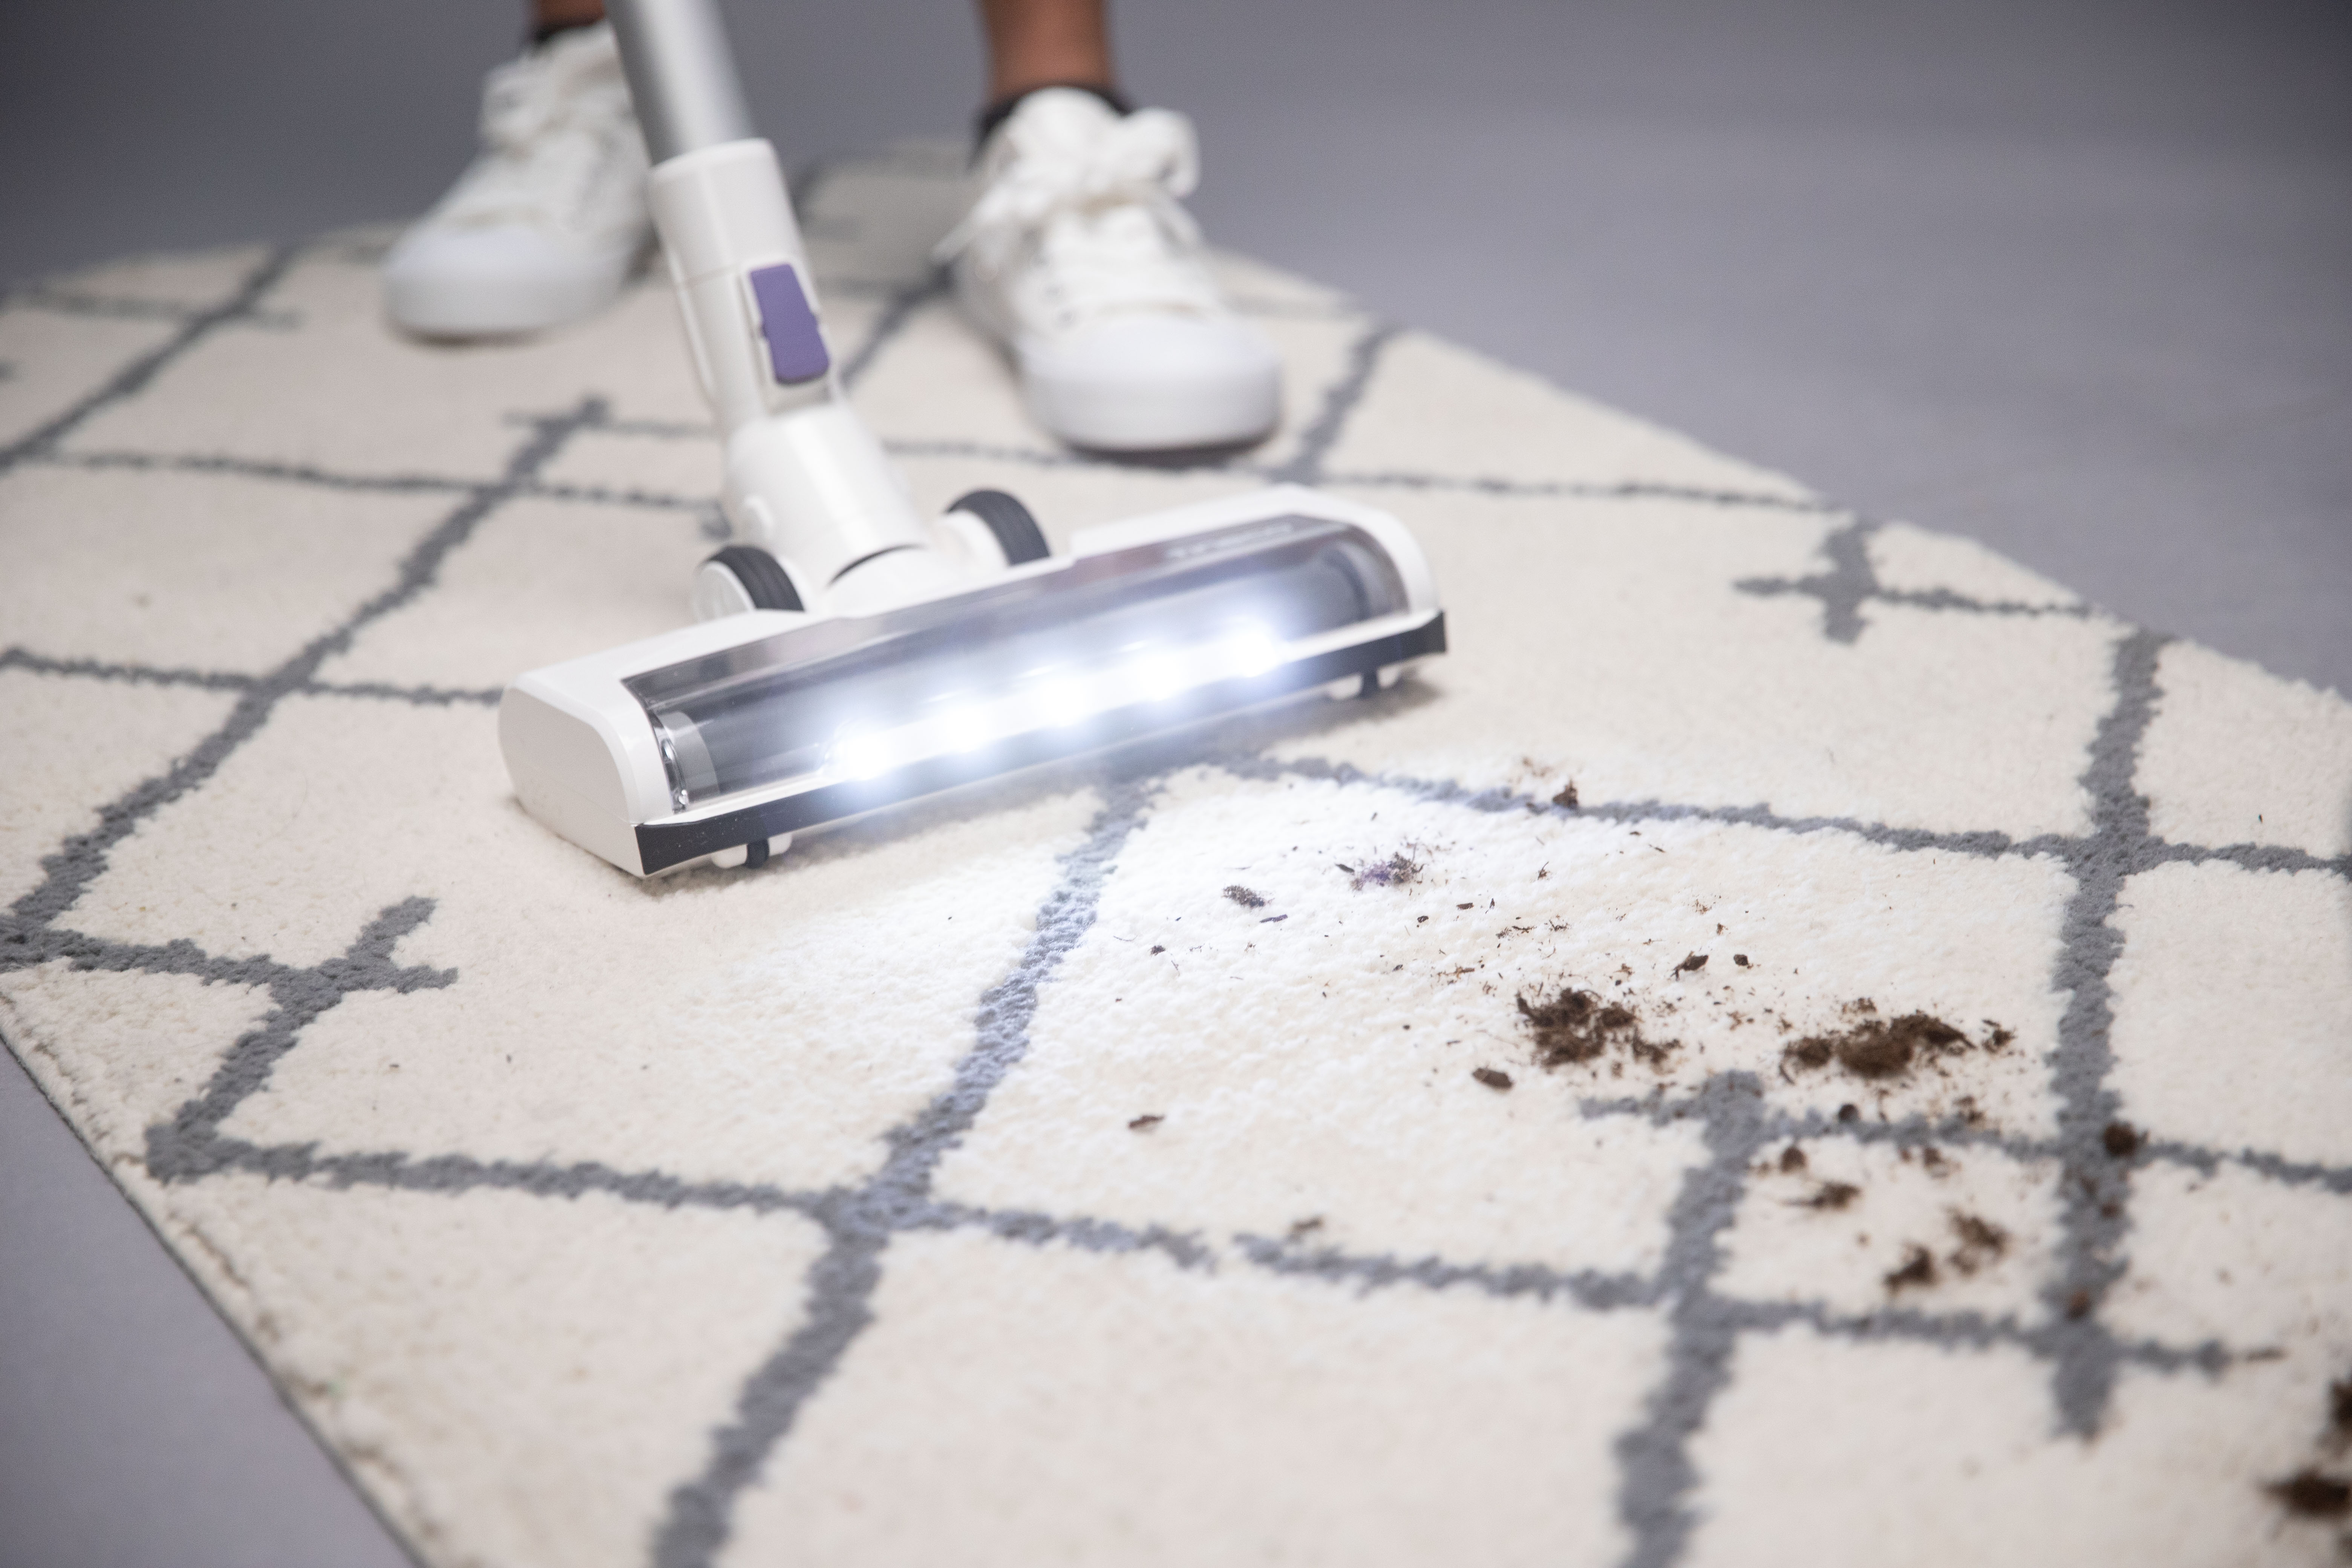 Tineco A10-D Plus - Cordless Ultralight Stick Vacuum Cleaner for Hard Floors and Low-Pile Rugs - image 3 of 6